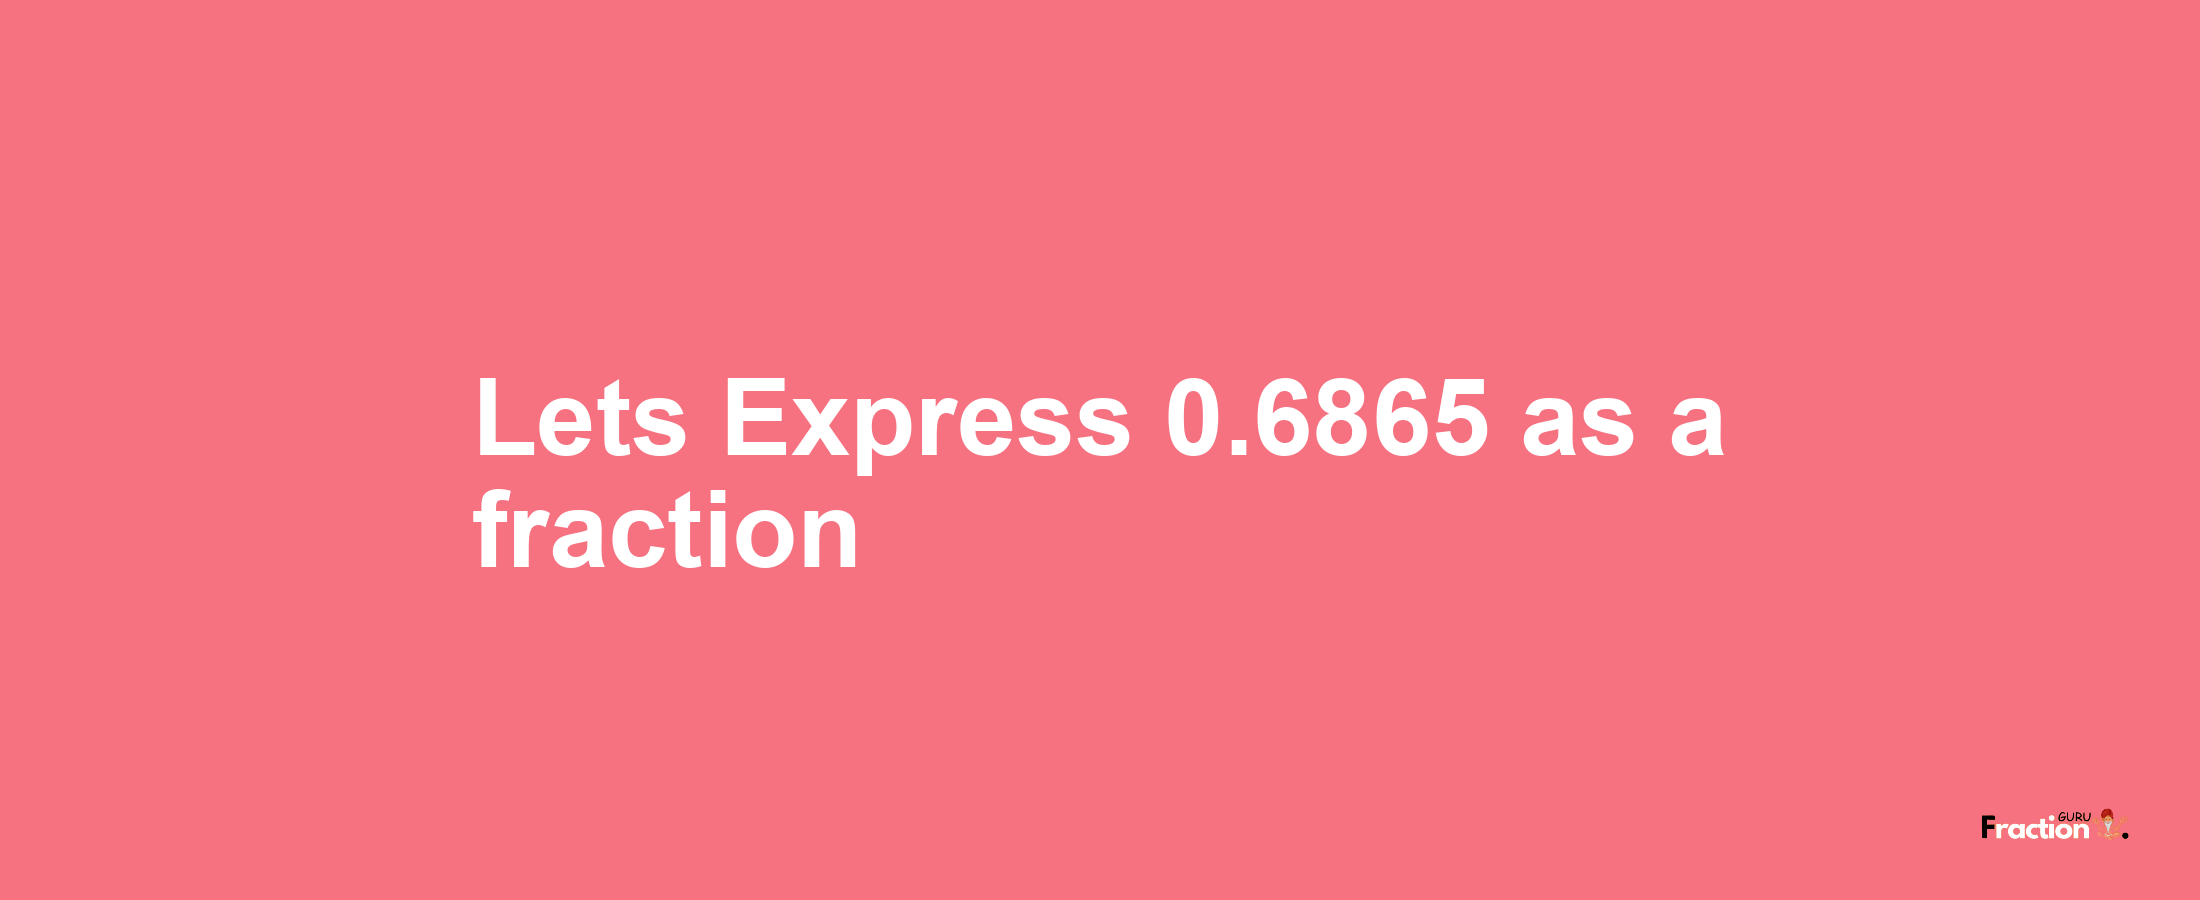 Lets Express 0.6865 as afraction